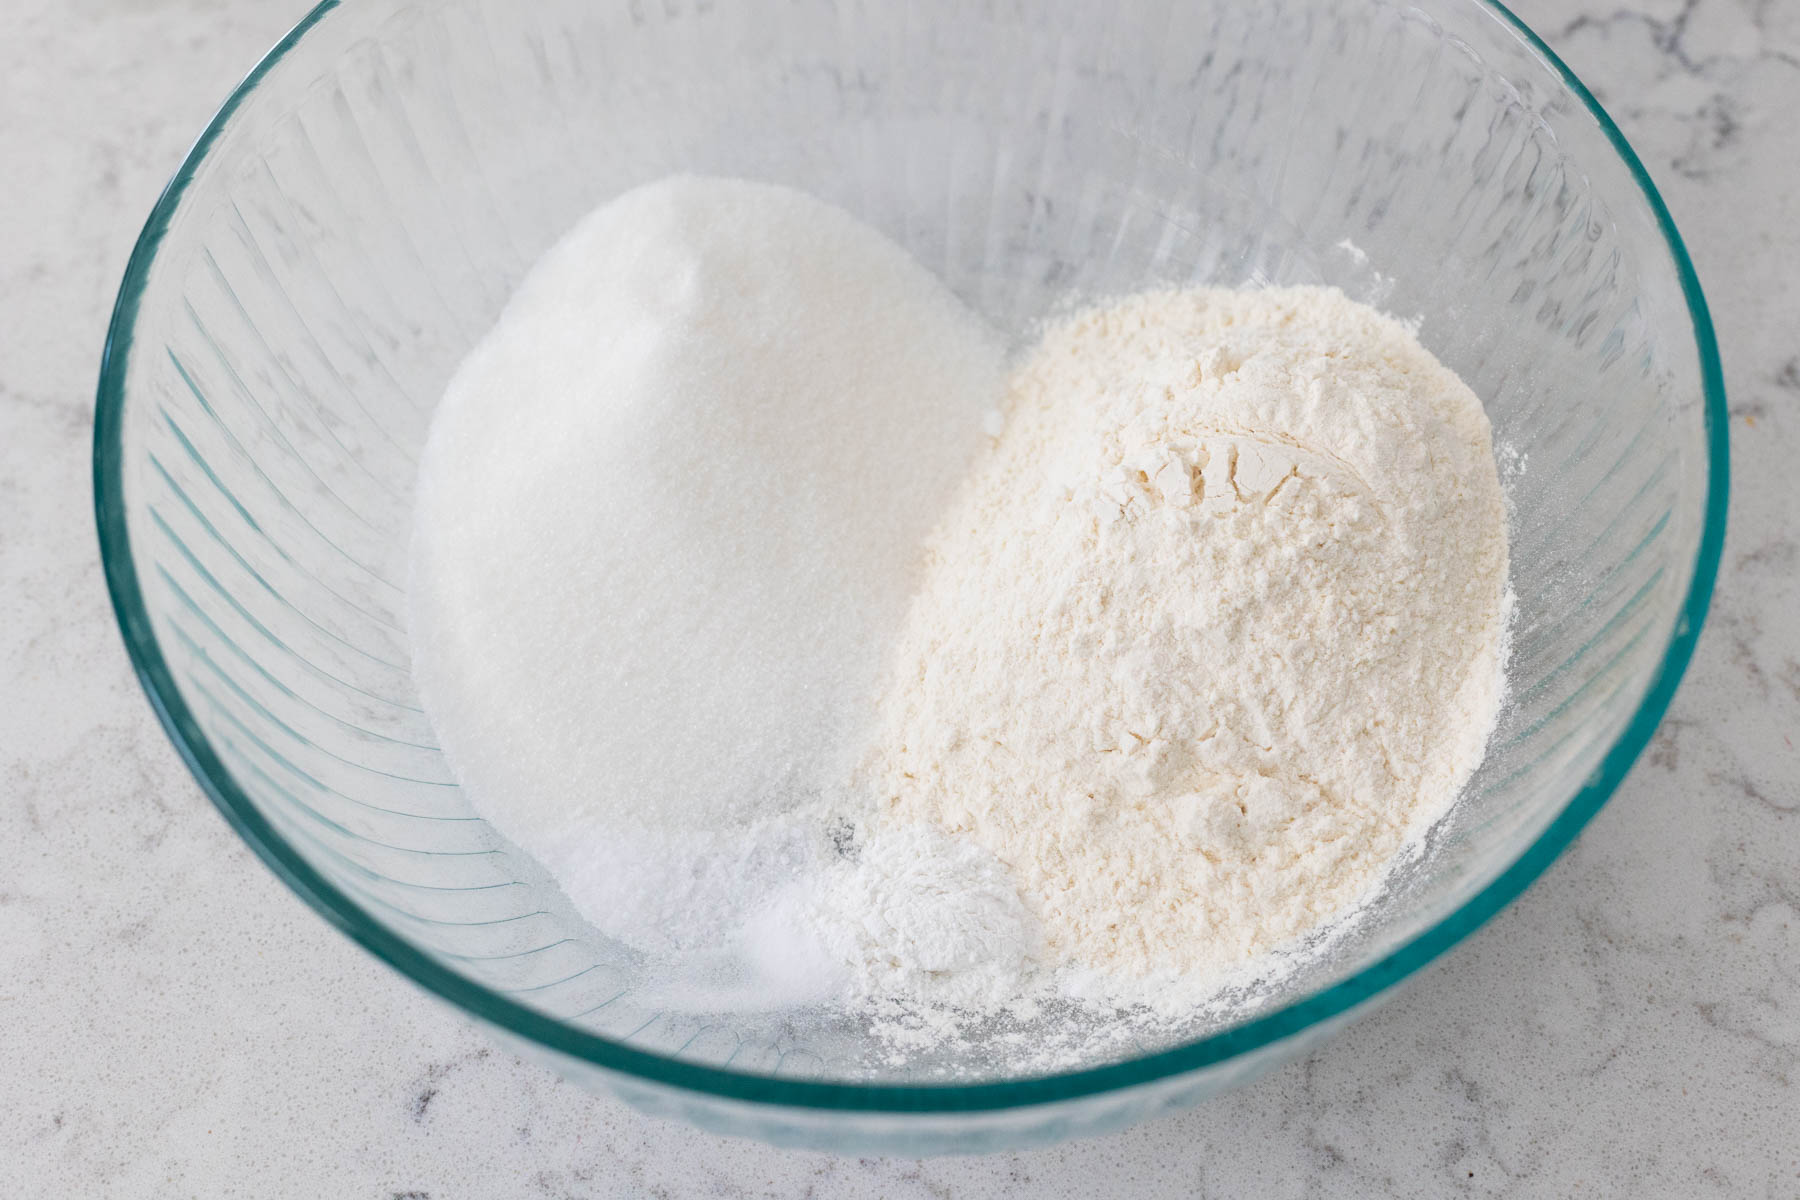 The flour, sugar, and other dry ingredients are in a large mixing bowl.